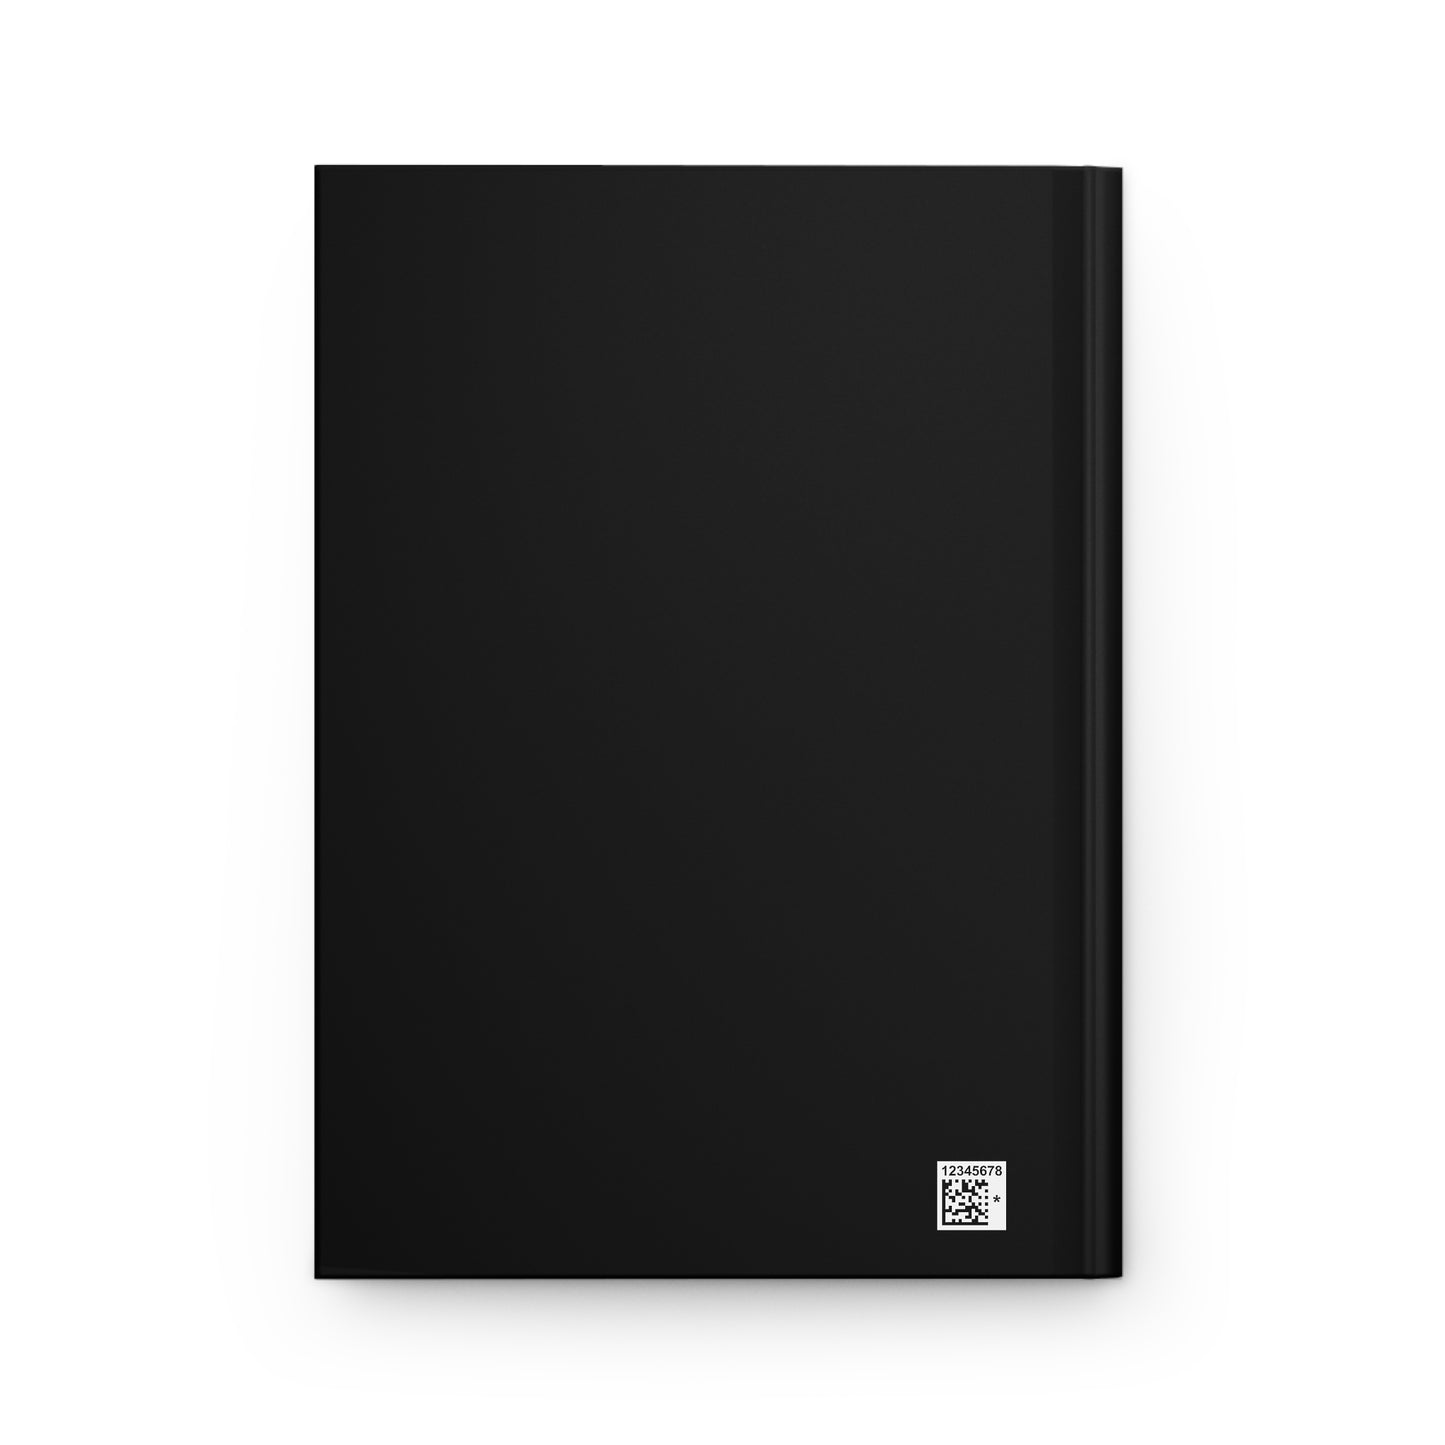 Slaying The Goliaths Daily Who Forgot Who My God Was Hardcover Journal Matte